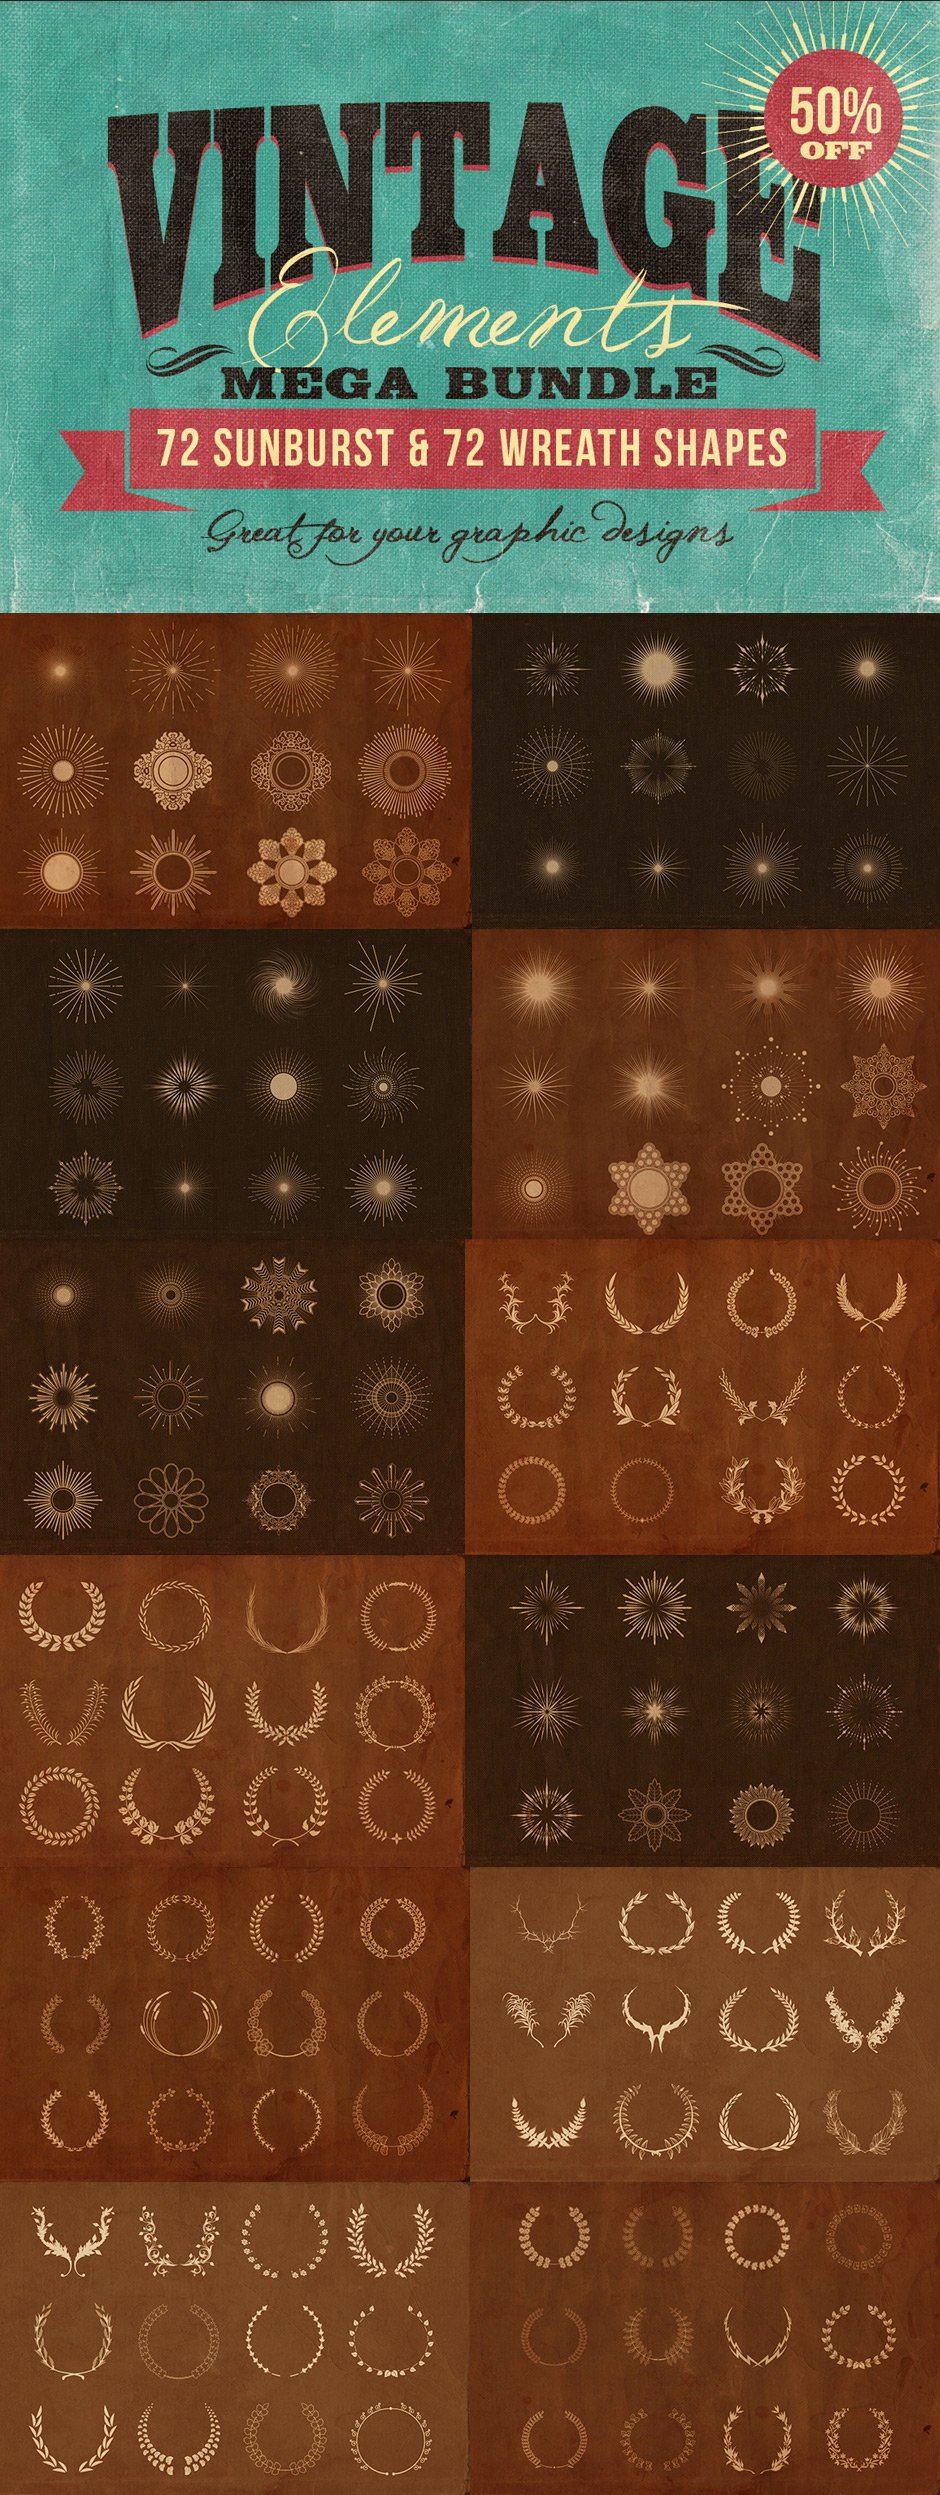 Ultimate Vector Elements Collection